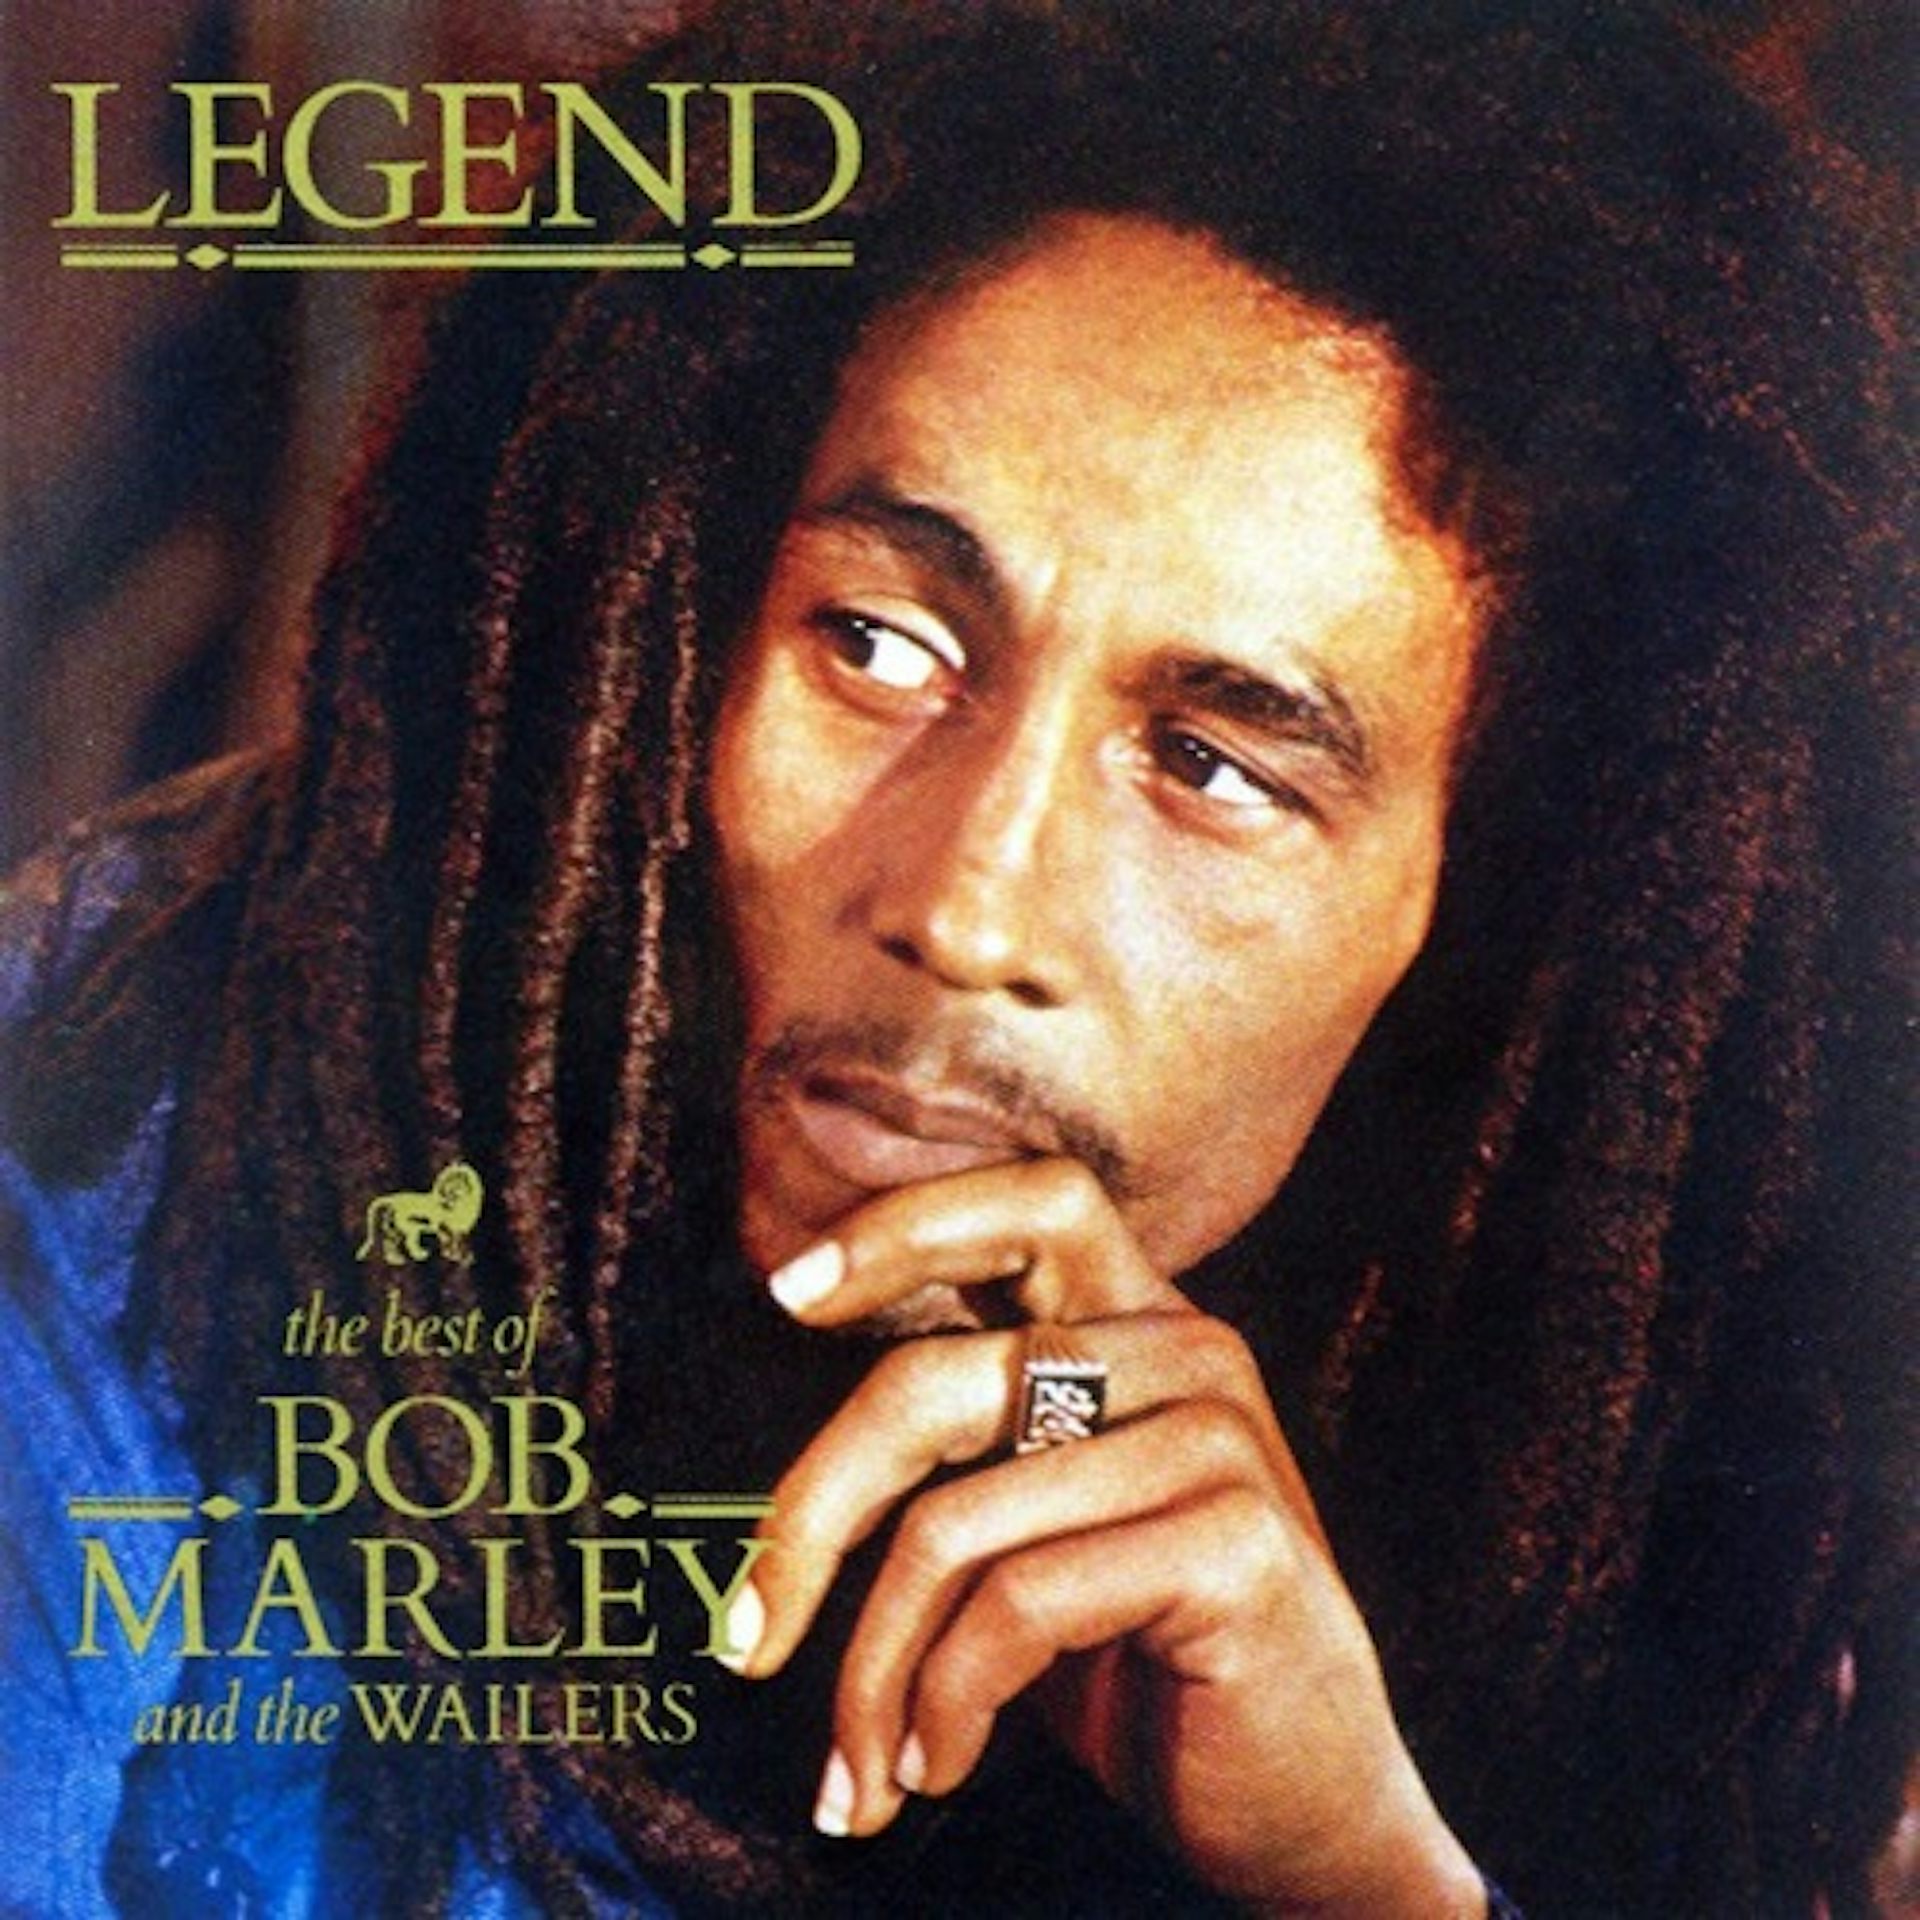 Under the influence of … Bob Marley, the timeless music man